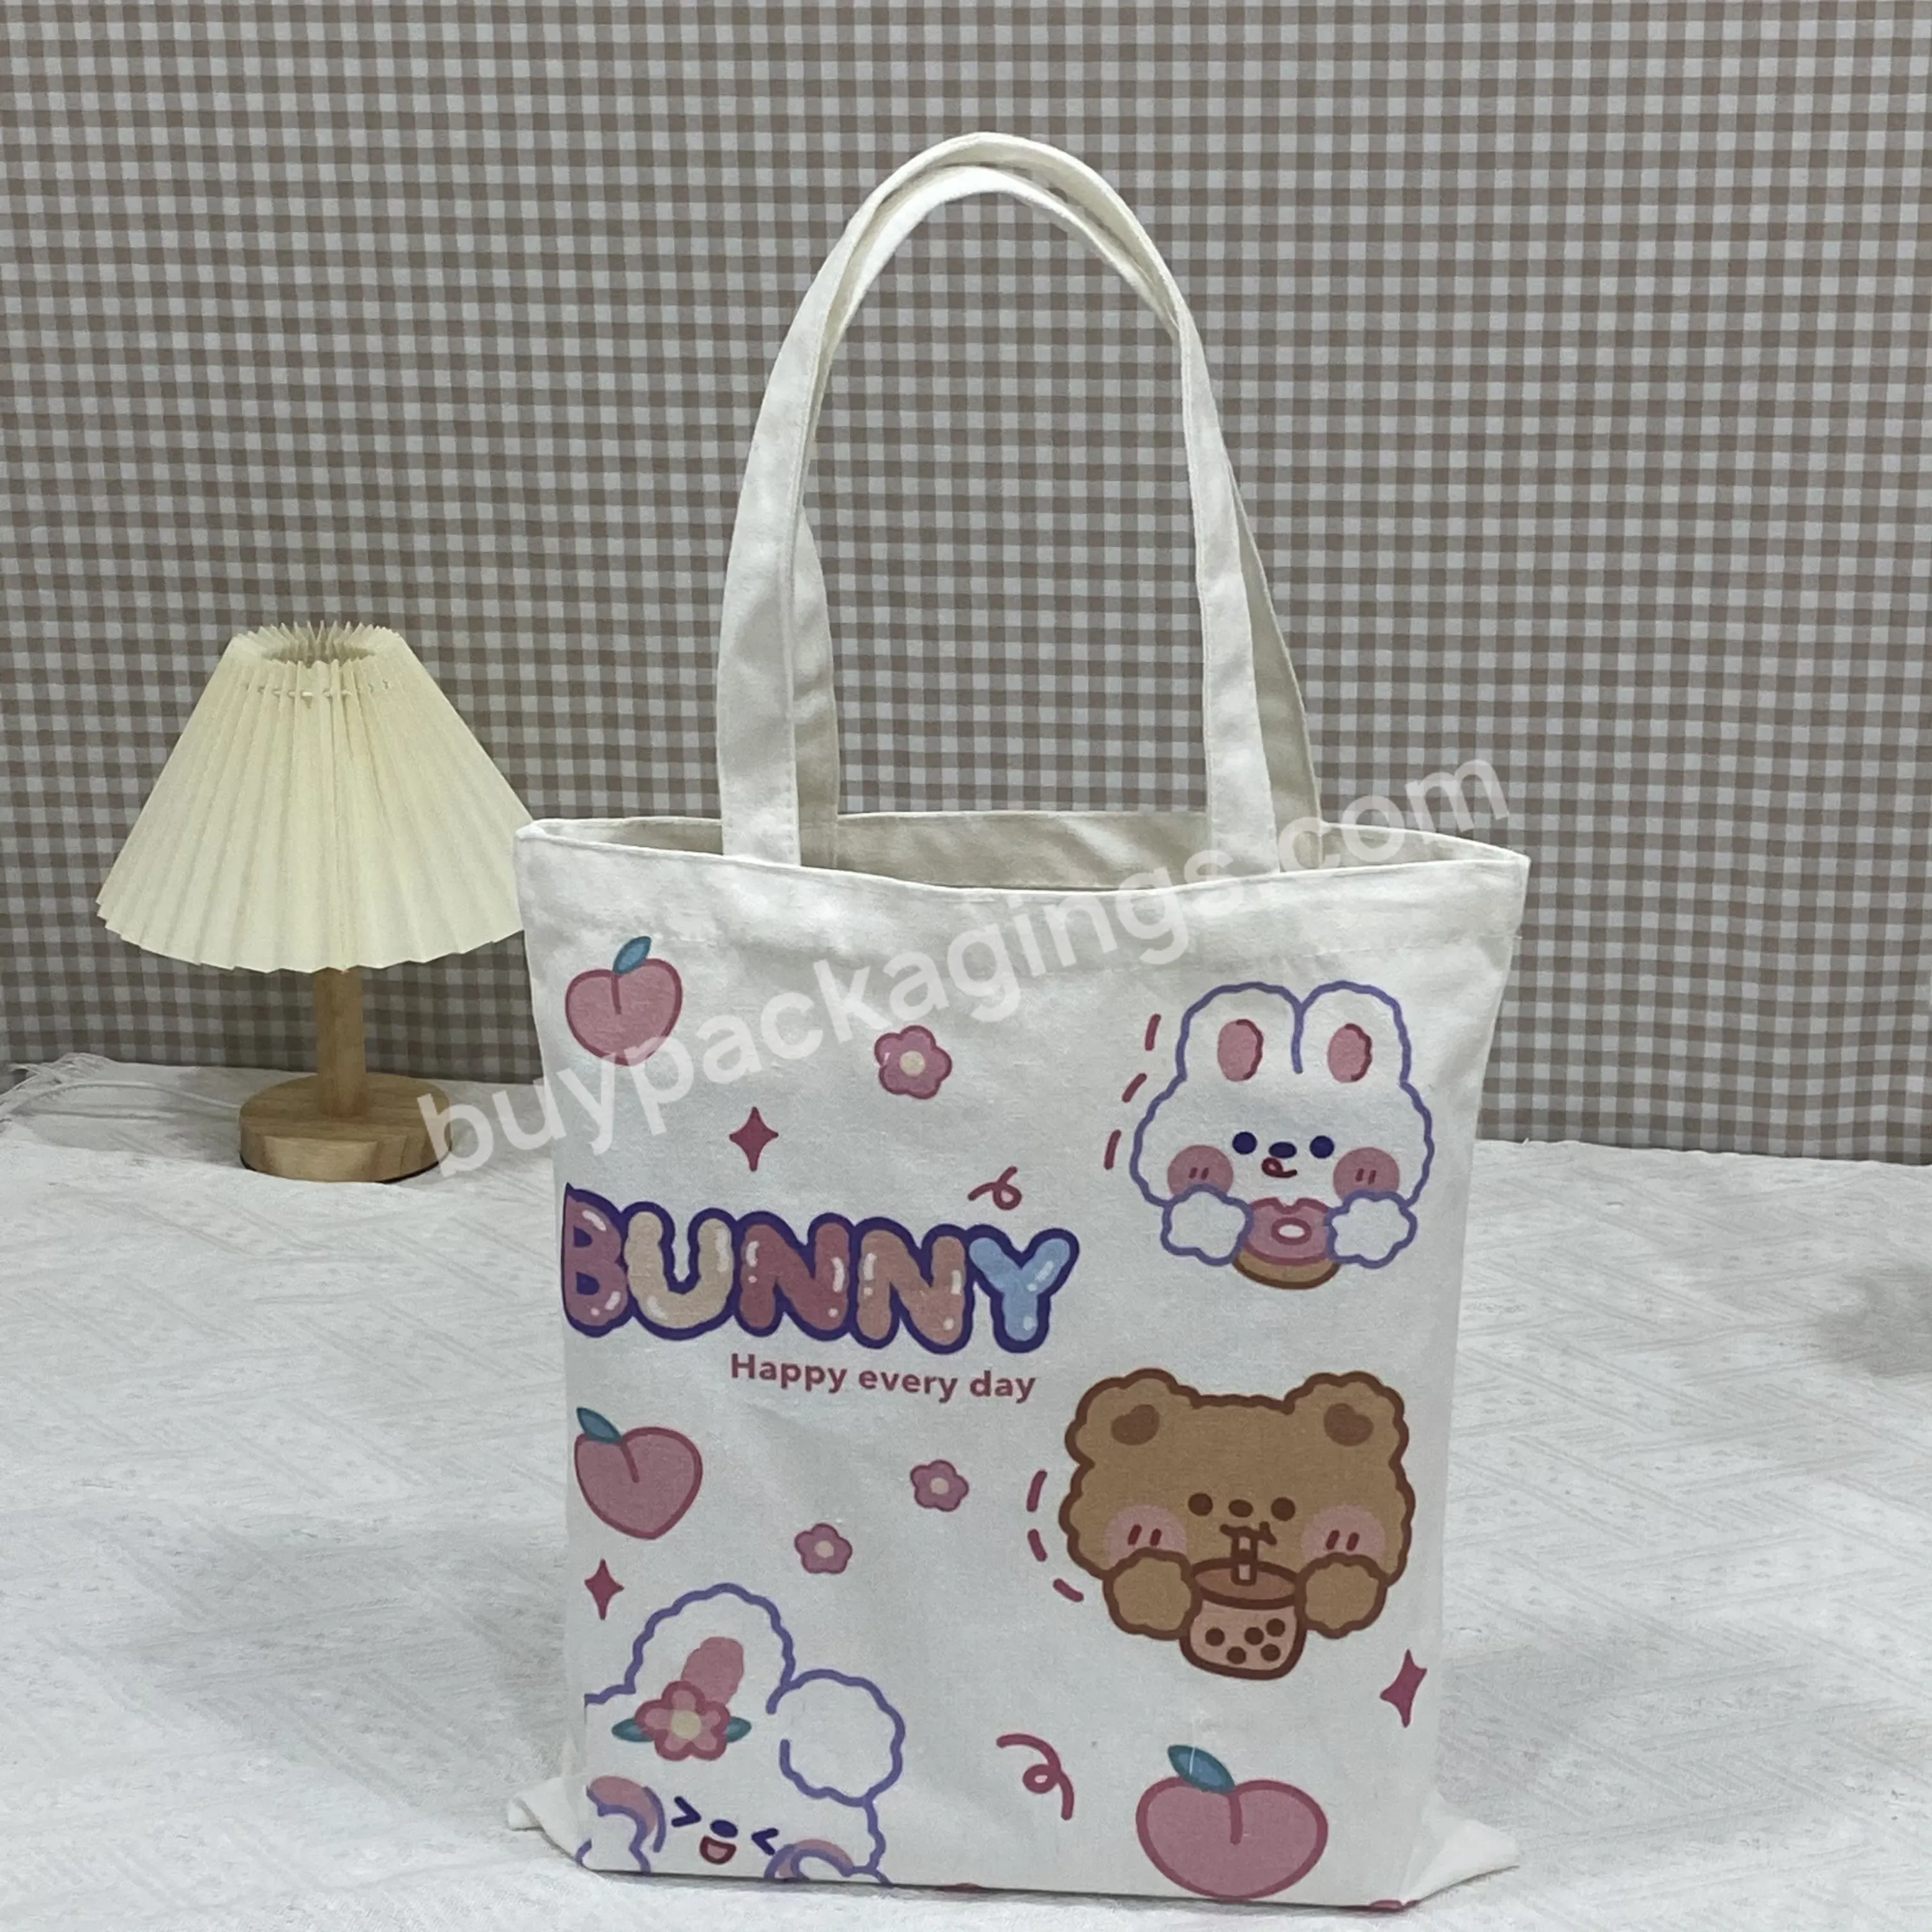 High Quality Durable Ecological Cotton Bag Recyclable Customized Canvas Bag With Pattern For Shopping - Buy Canvas Bag,Canvas Shopping Bag,Cotton Bag.